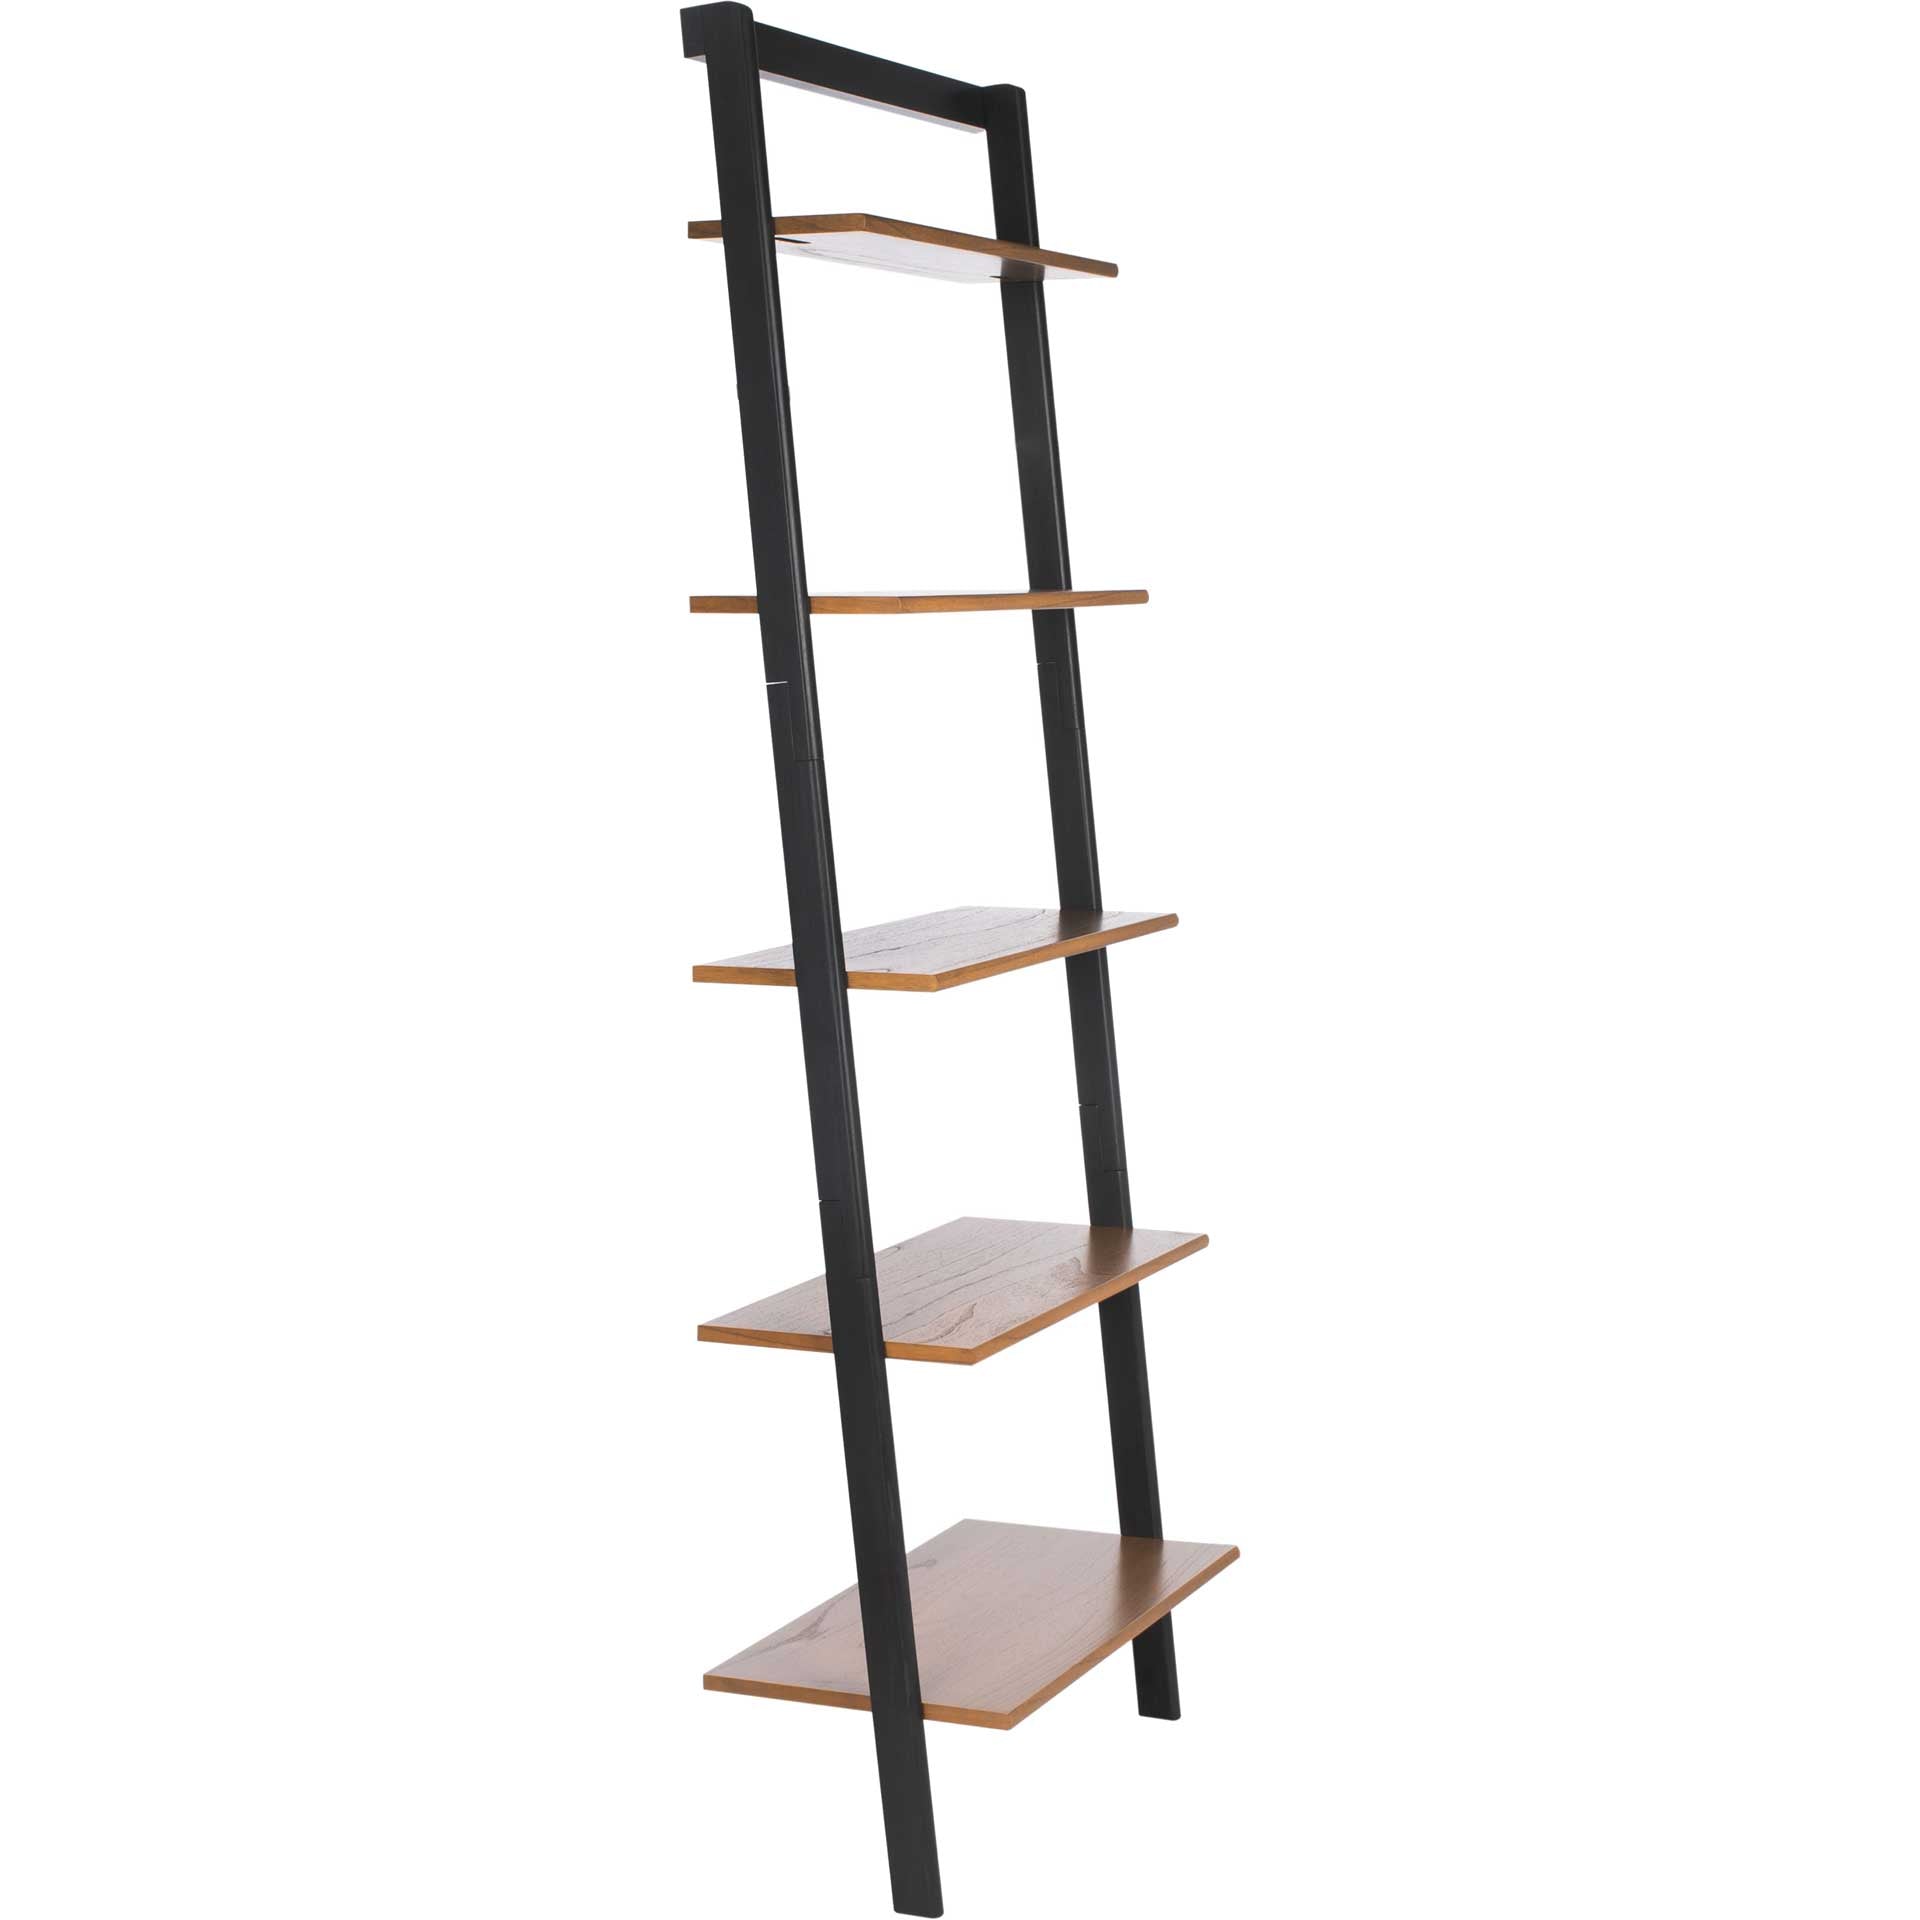 Cuallea 5 Tier Leaning Etagere Natural/Charcoal